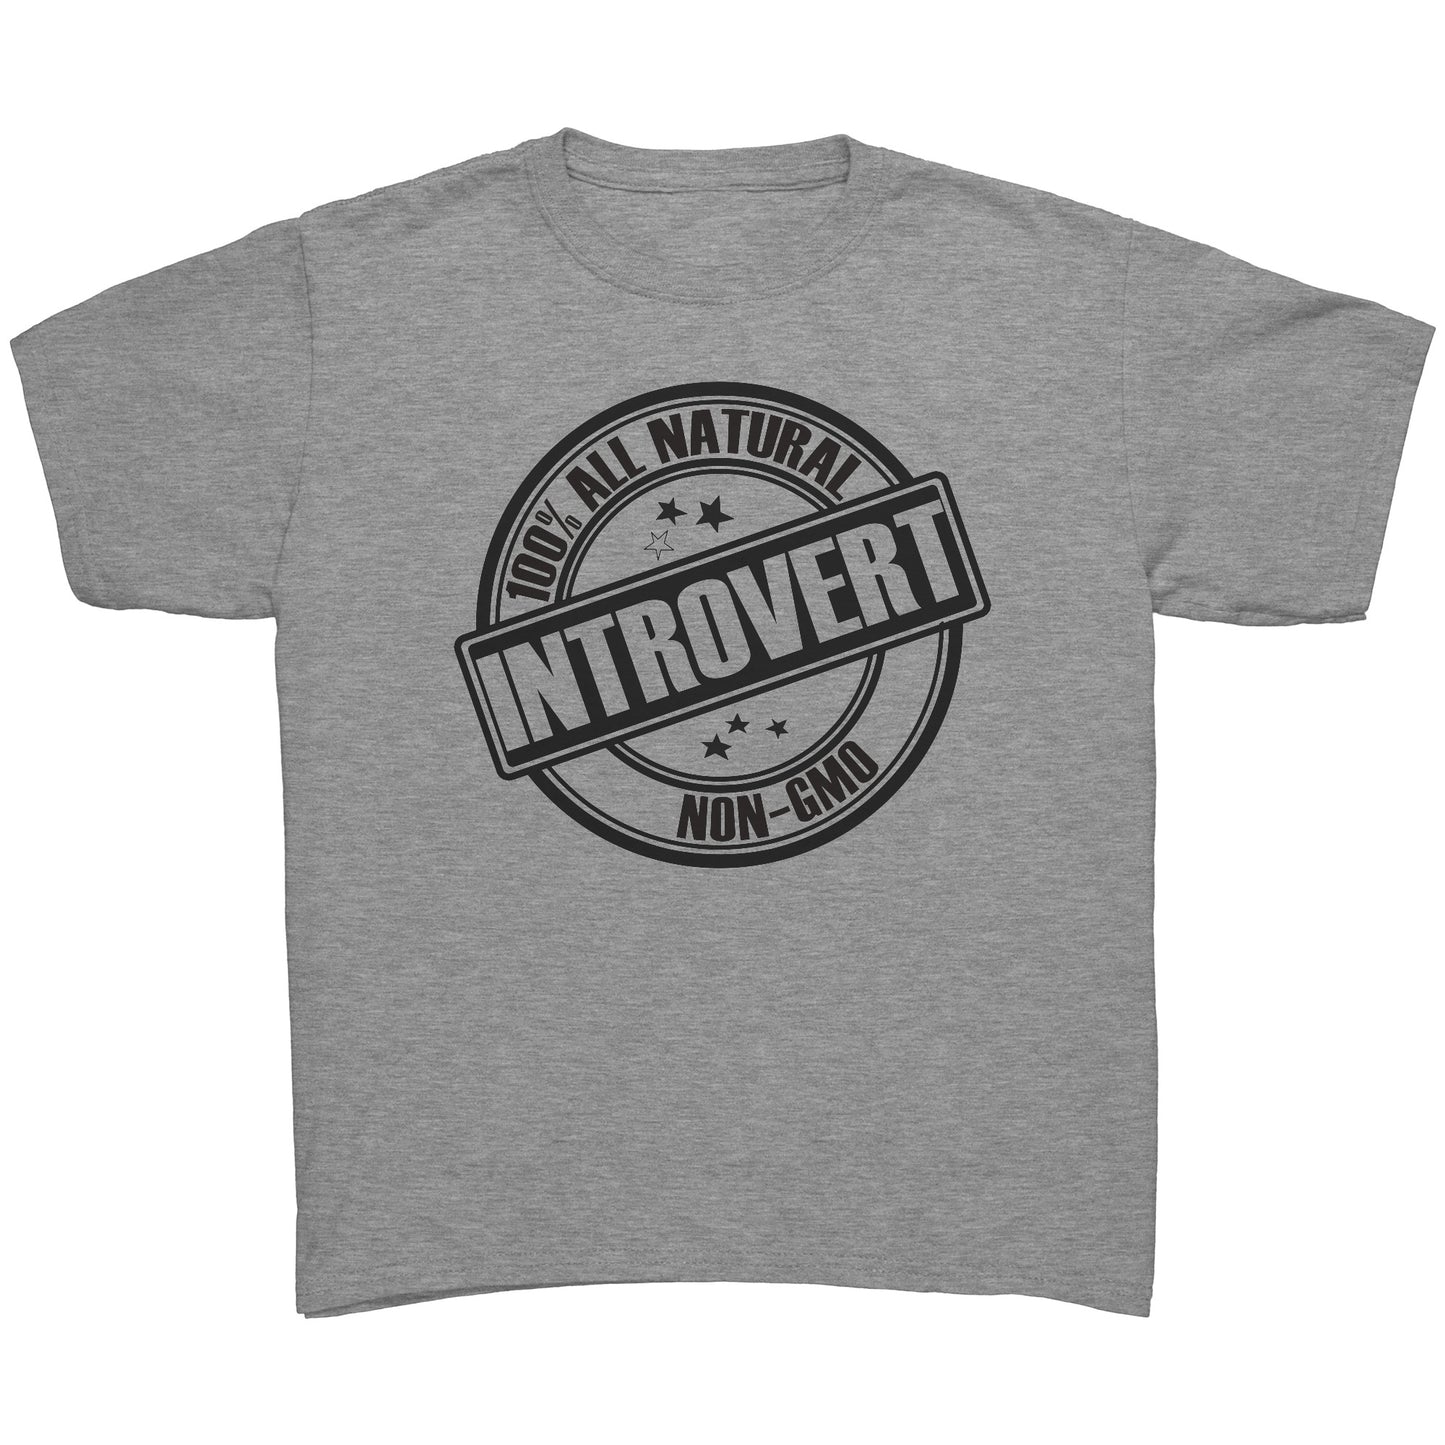 Youth Tee "100% All Natural Introvert" (black print)